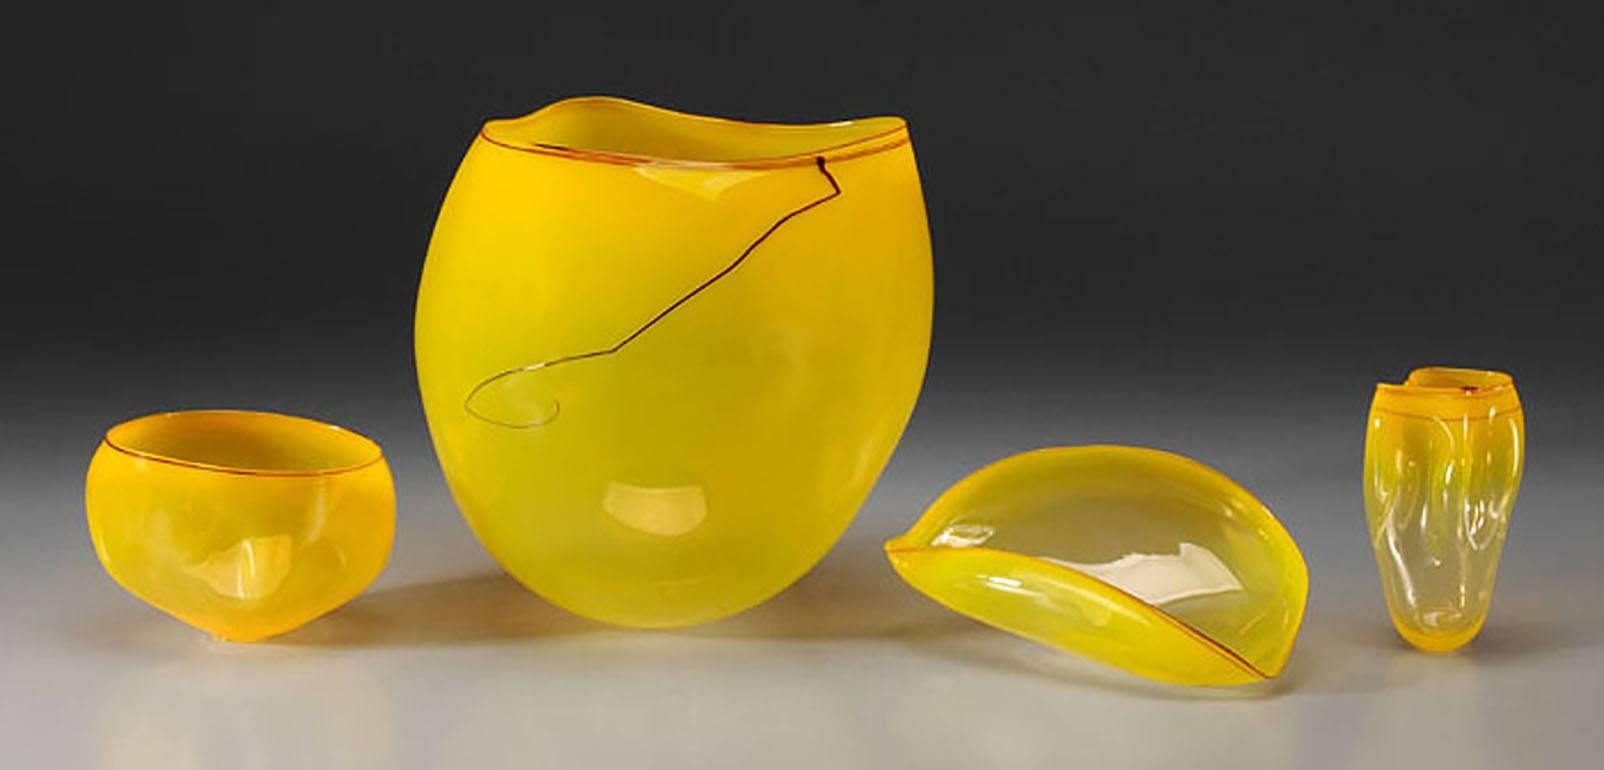 Dale Chihuly Abstract Sculpture – SUN YELLOW BASKET SET